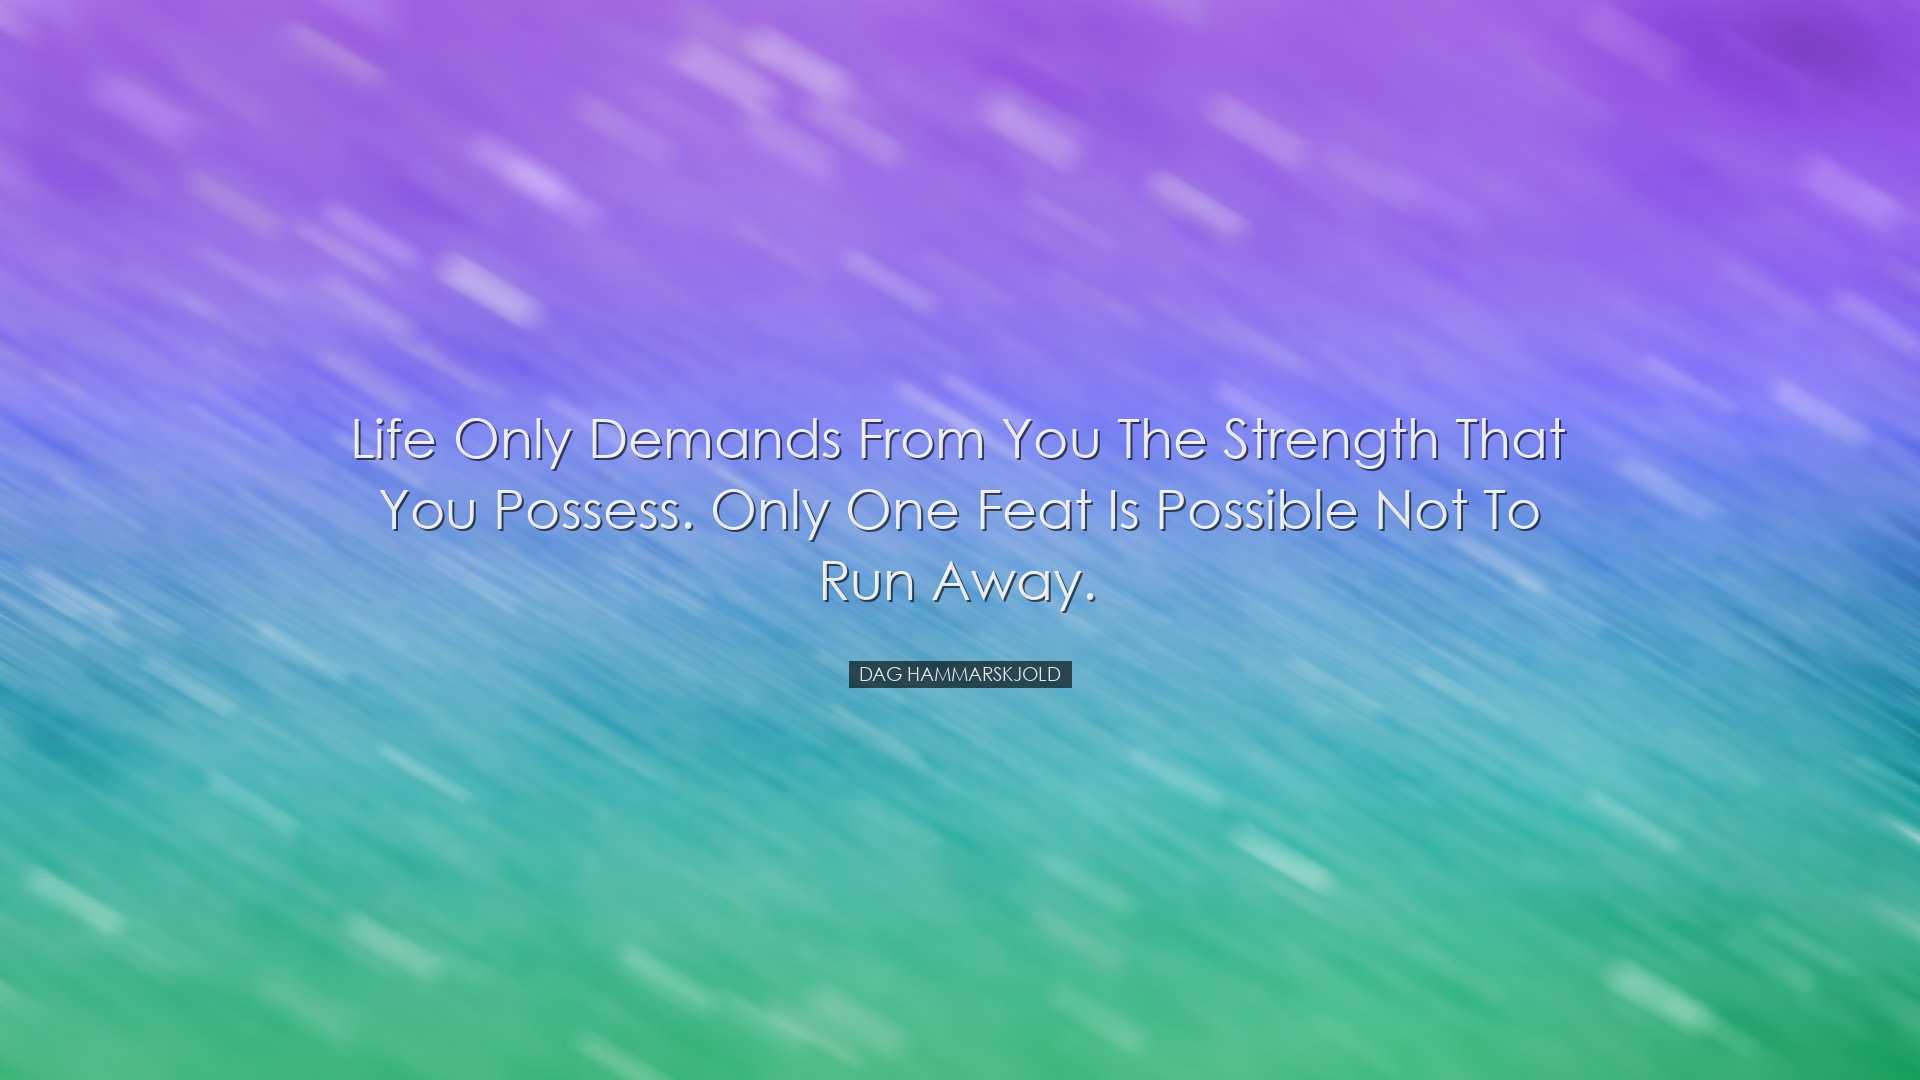 Life only demands from you the strength that you possess. Only one